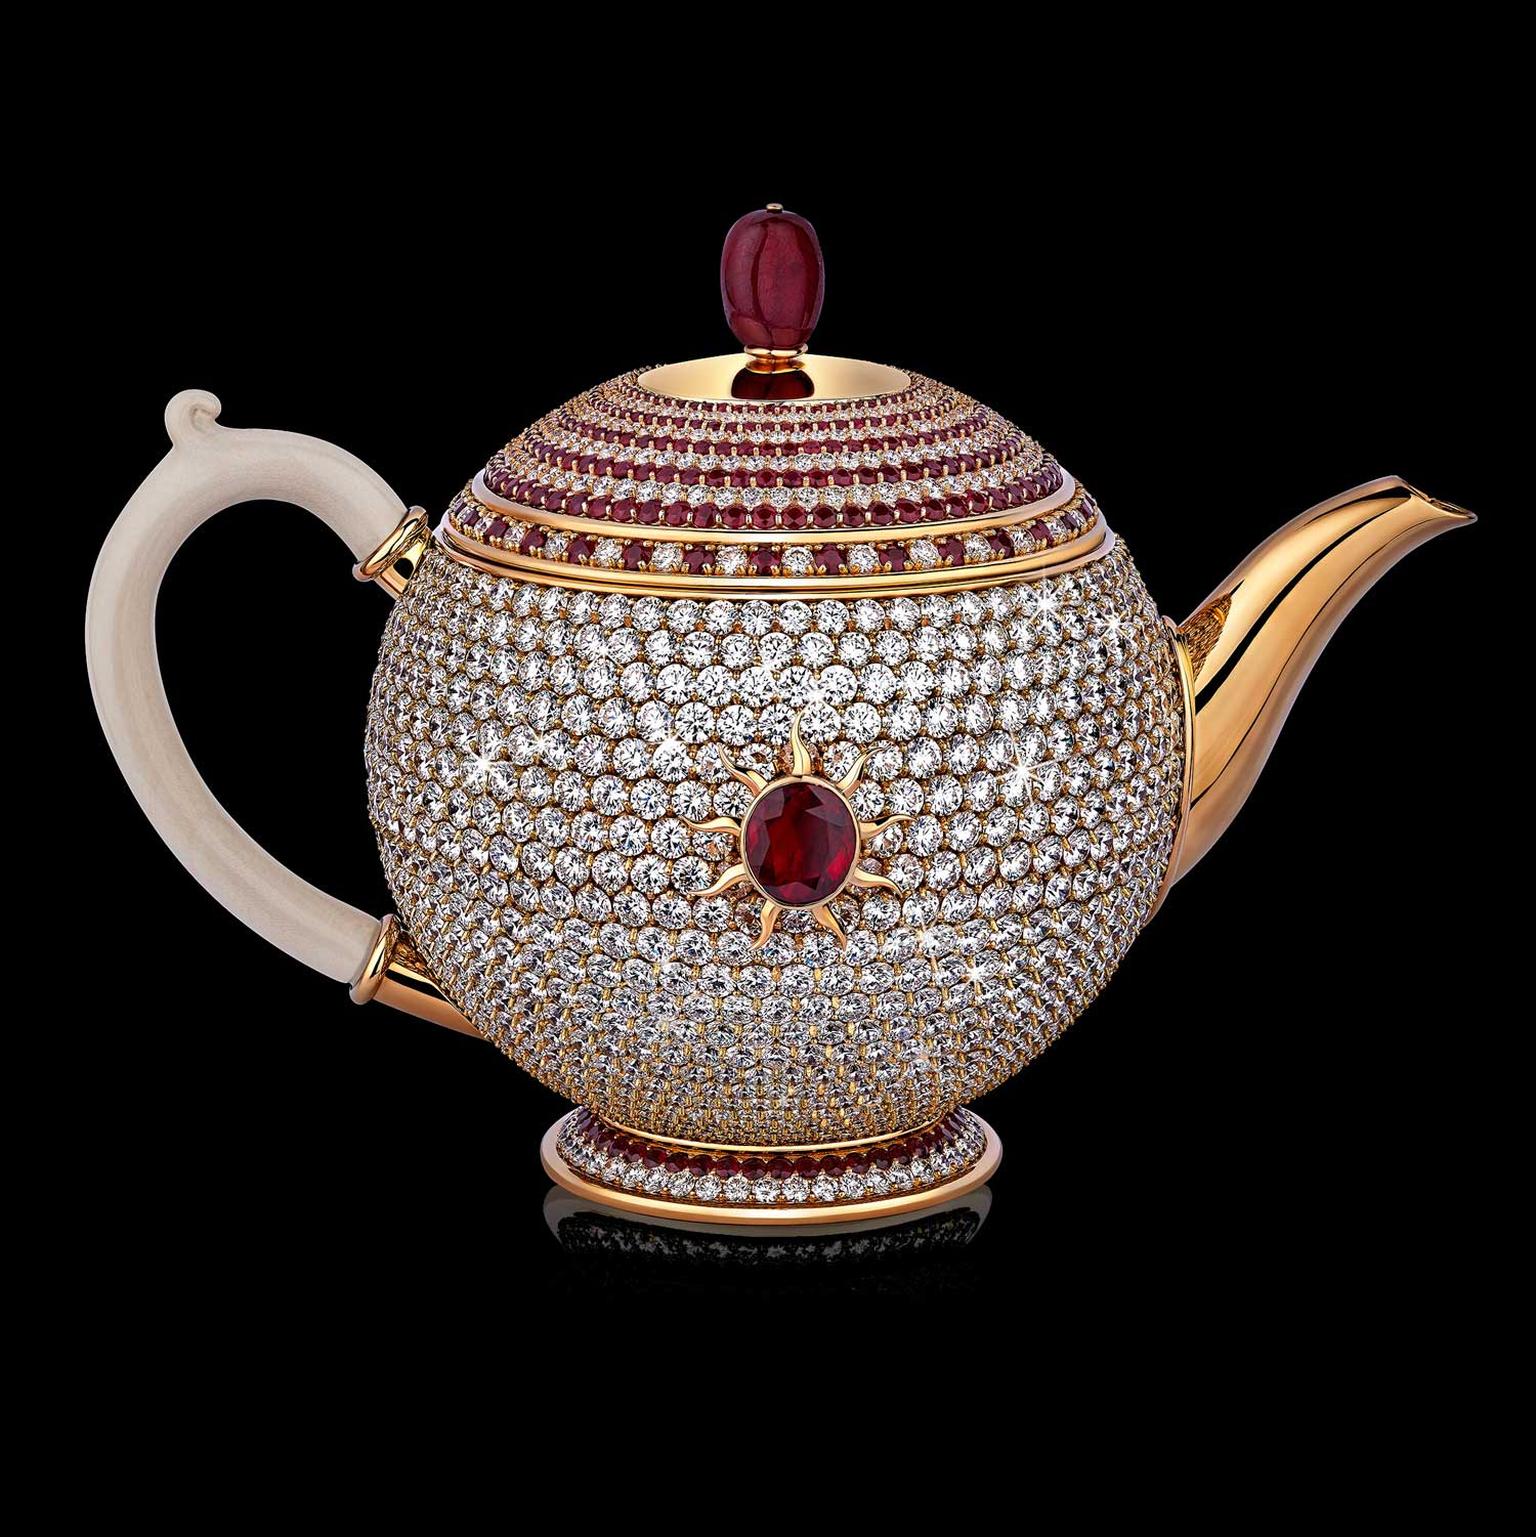 Egoist: the most expensive teapot in the world